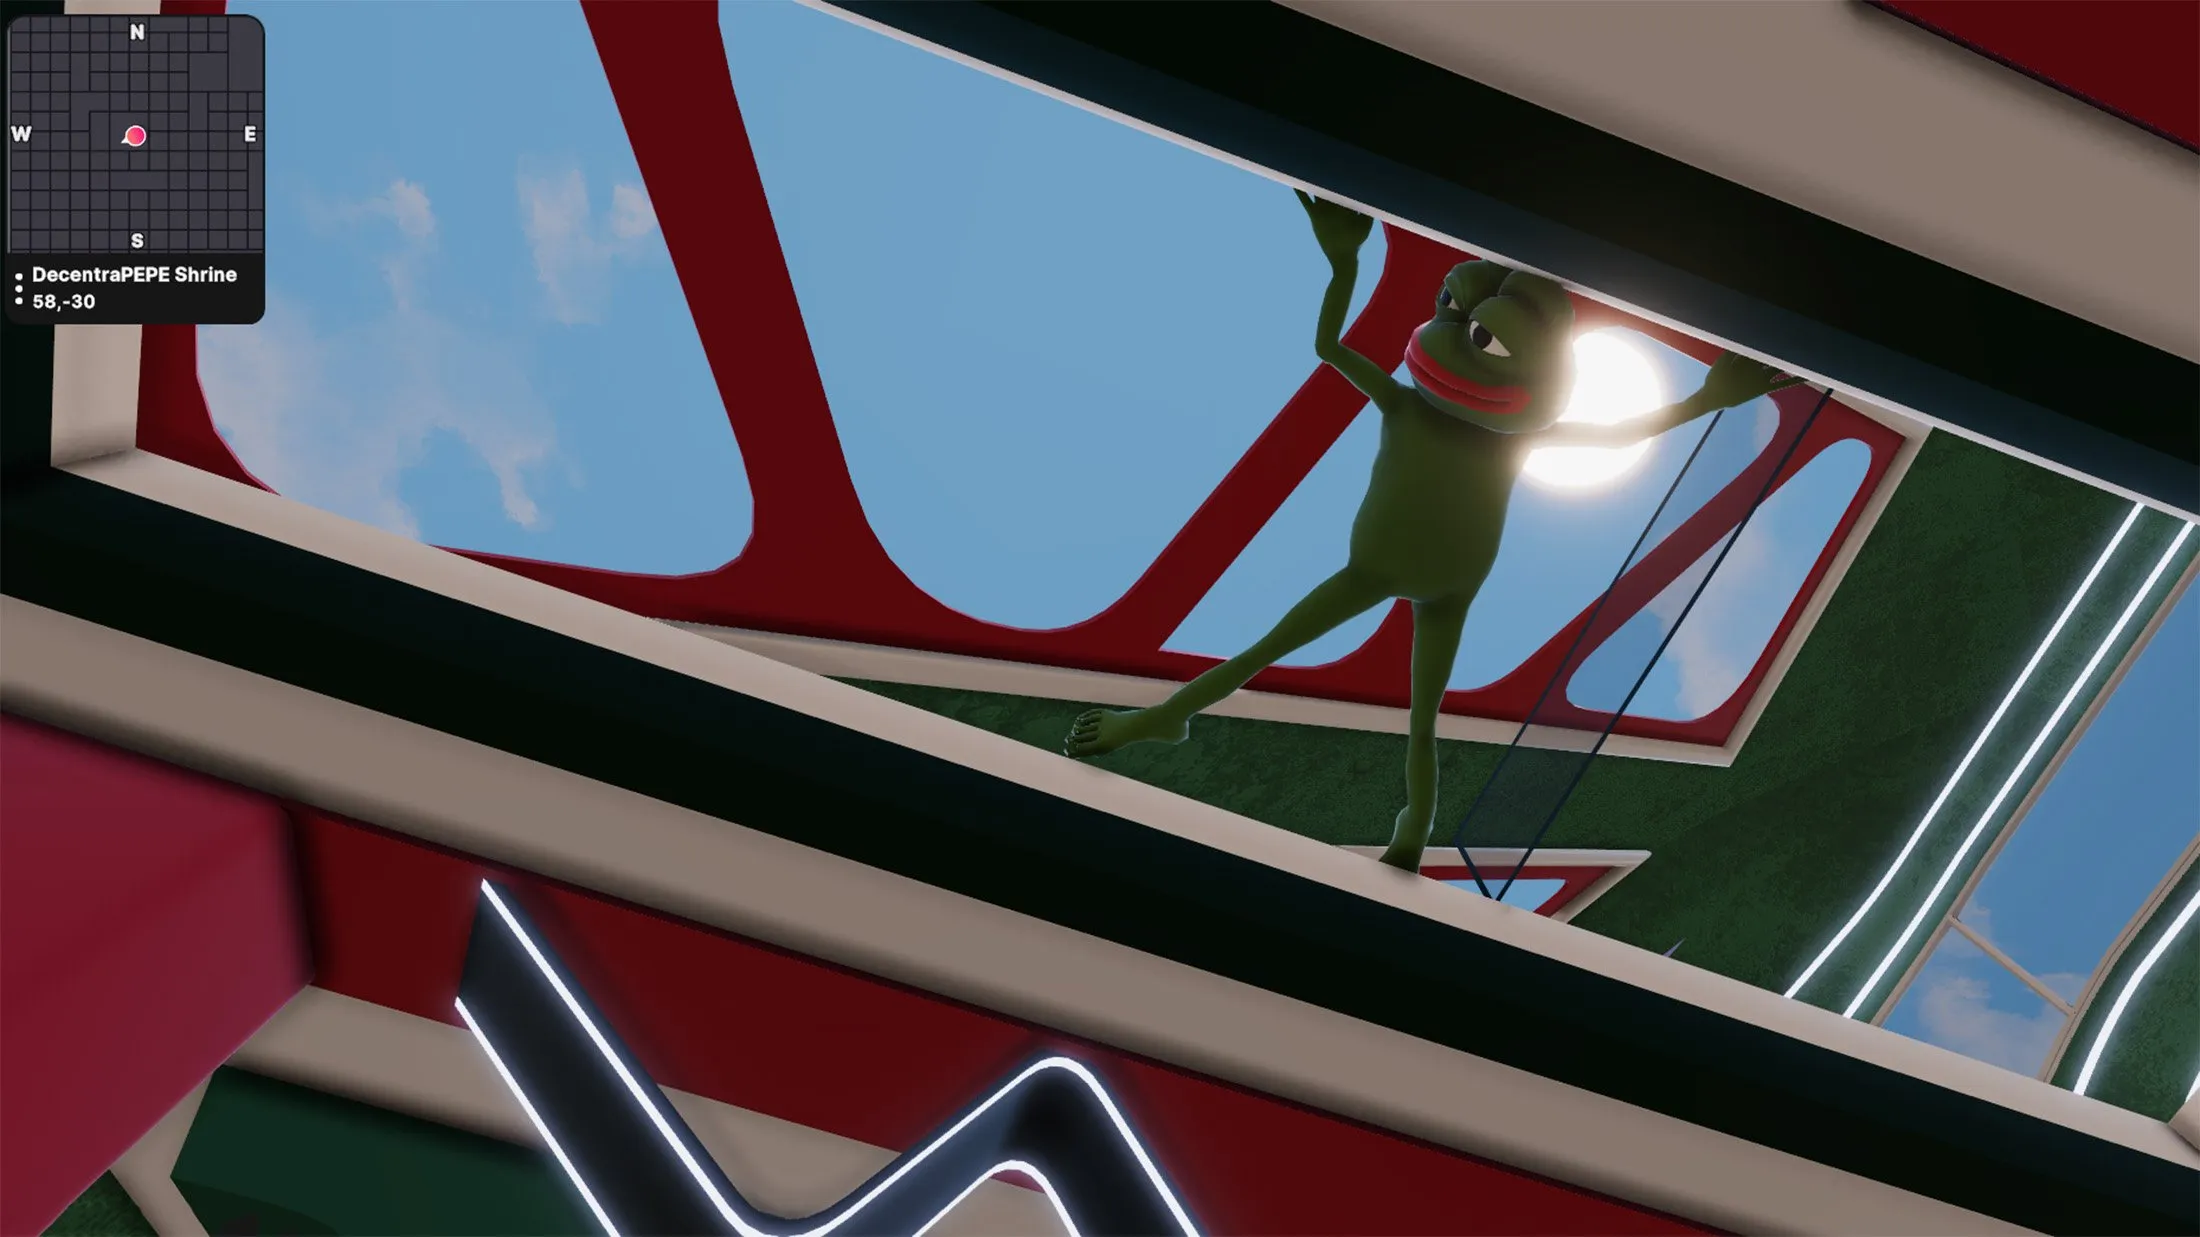 image of a PEPE character from an installation within Decentraland's metaverse art week